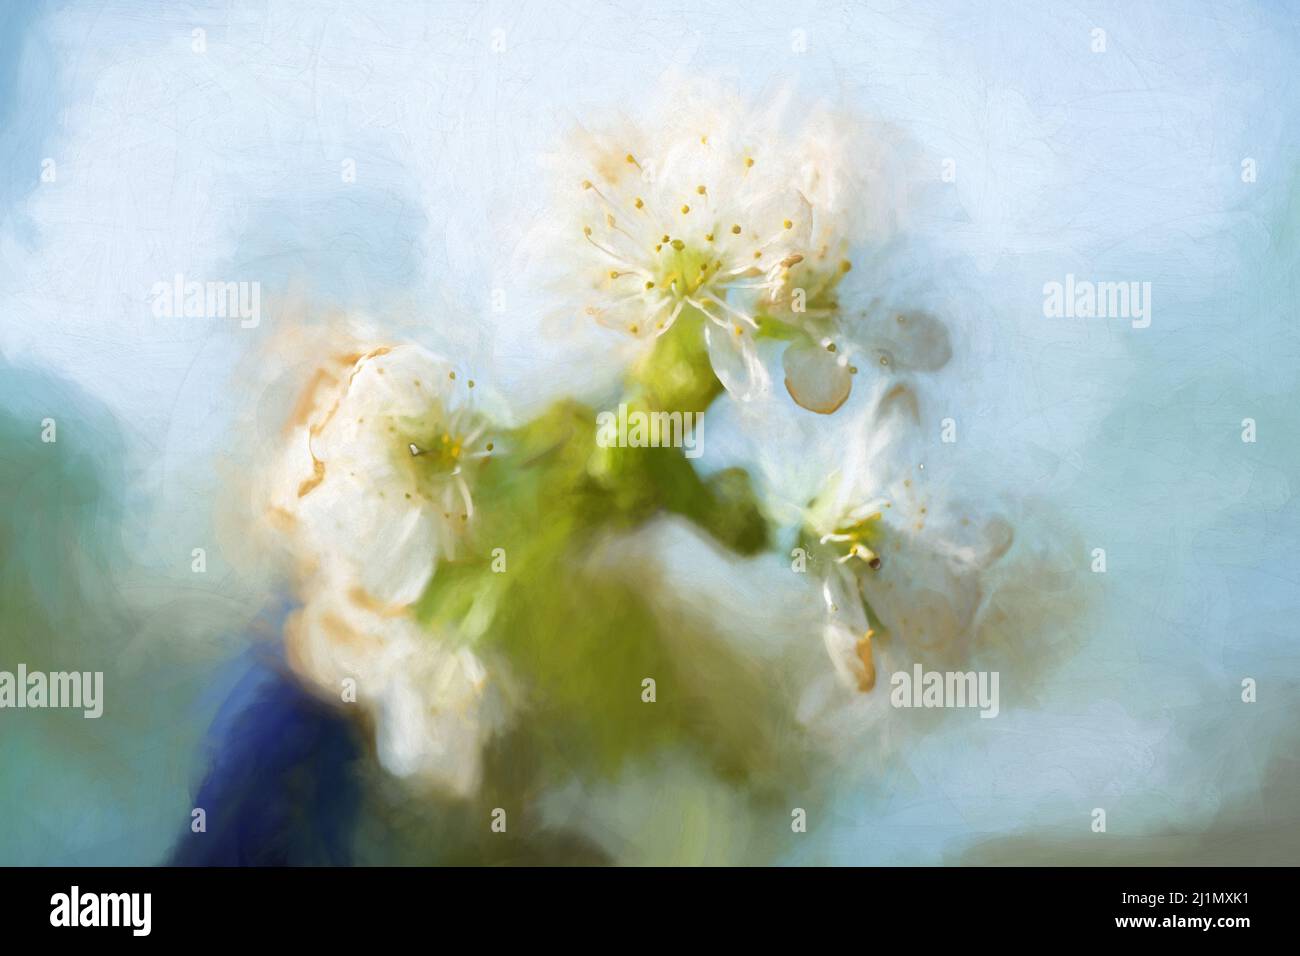 Digital painting of bright small white Cherry Blossom flowers in bloom in the garden with shallow depth of field. Stock Photo